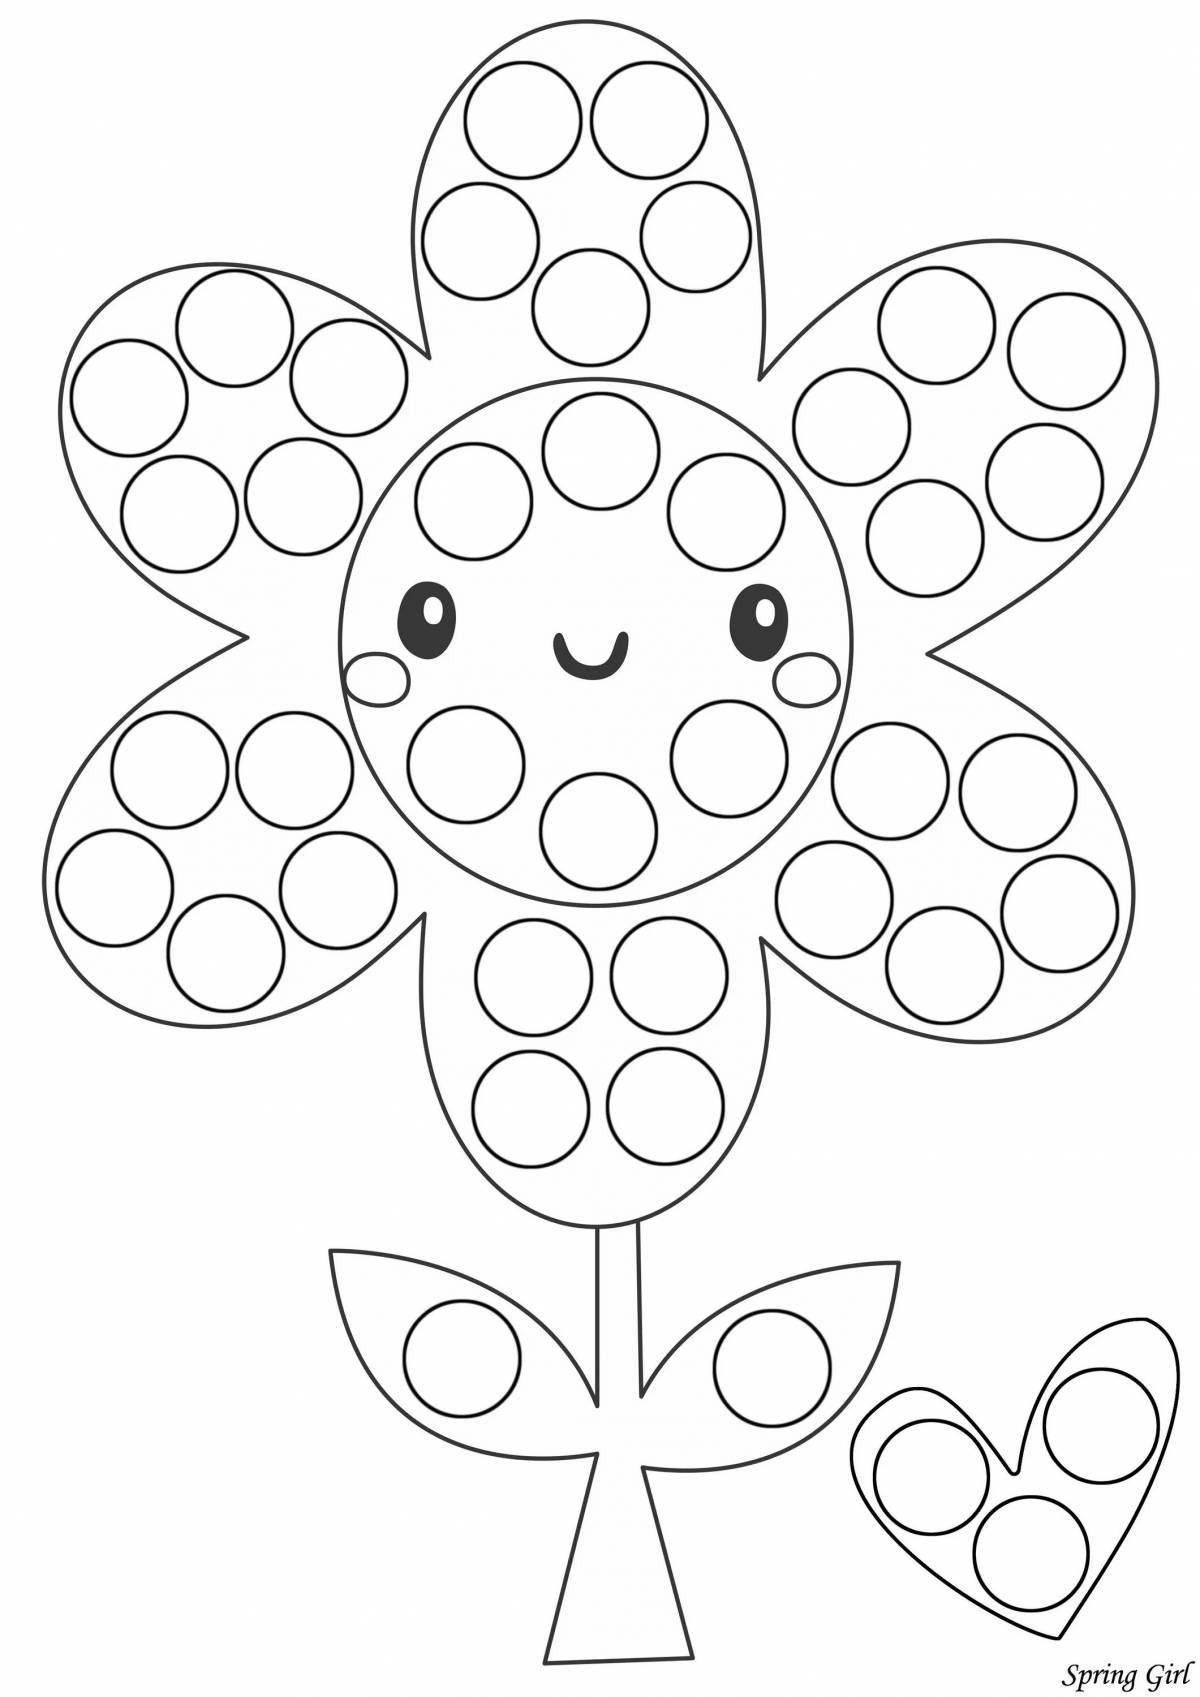 Cute cotton swabs coloring pages for kids